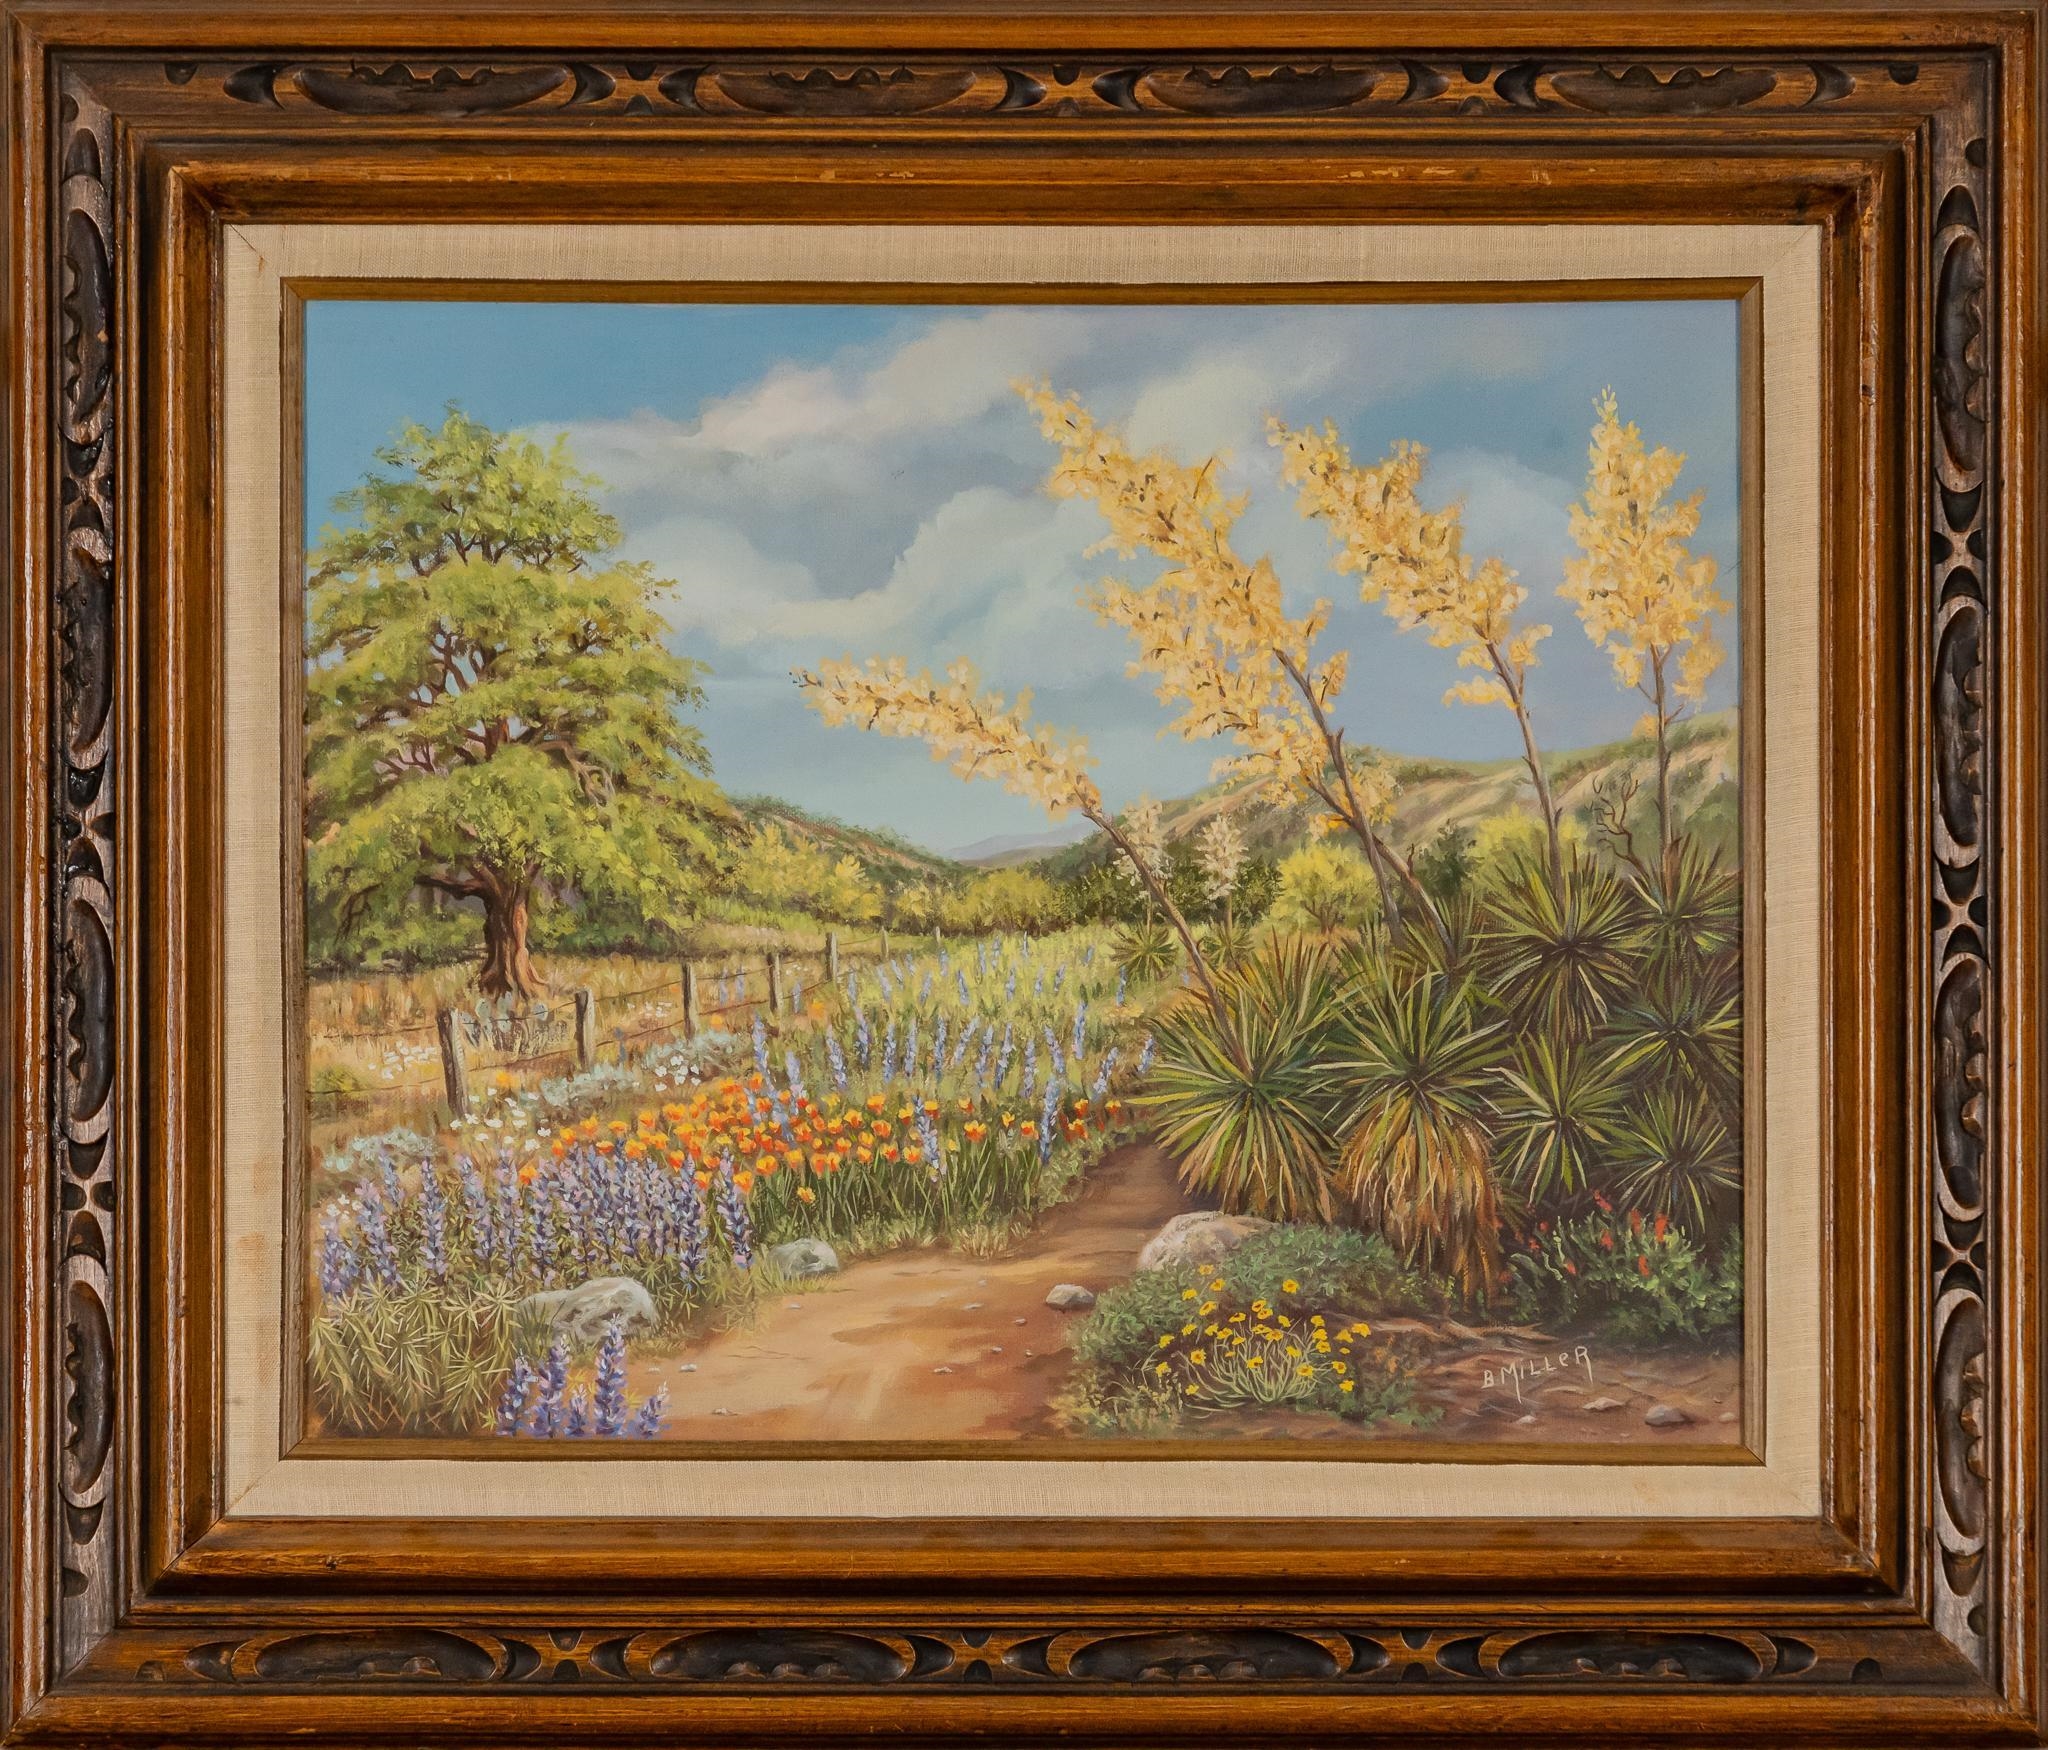 Artwork by B. Miller, Hill Country Bluebonnets, Made of oil on canvas